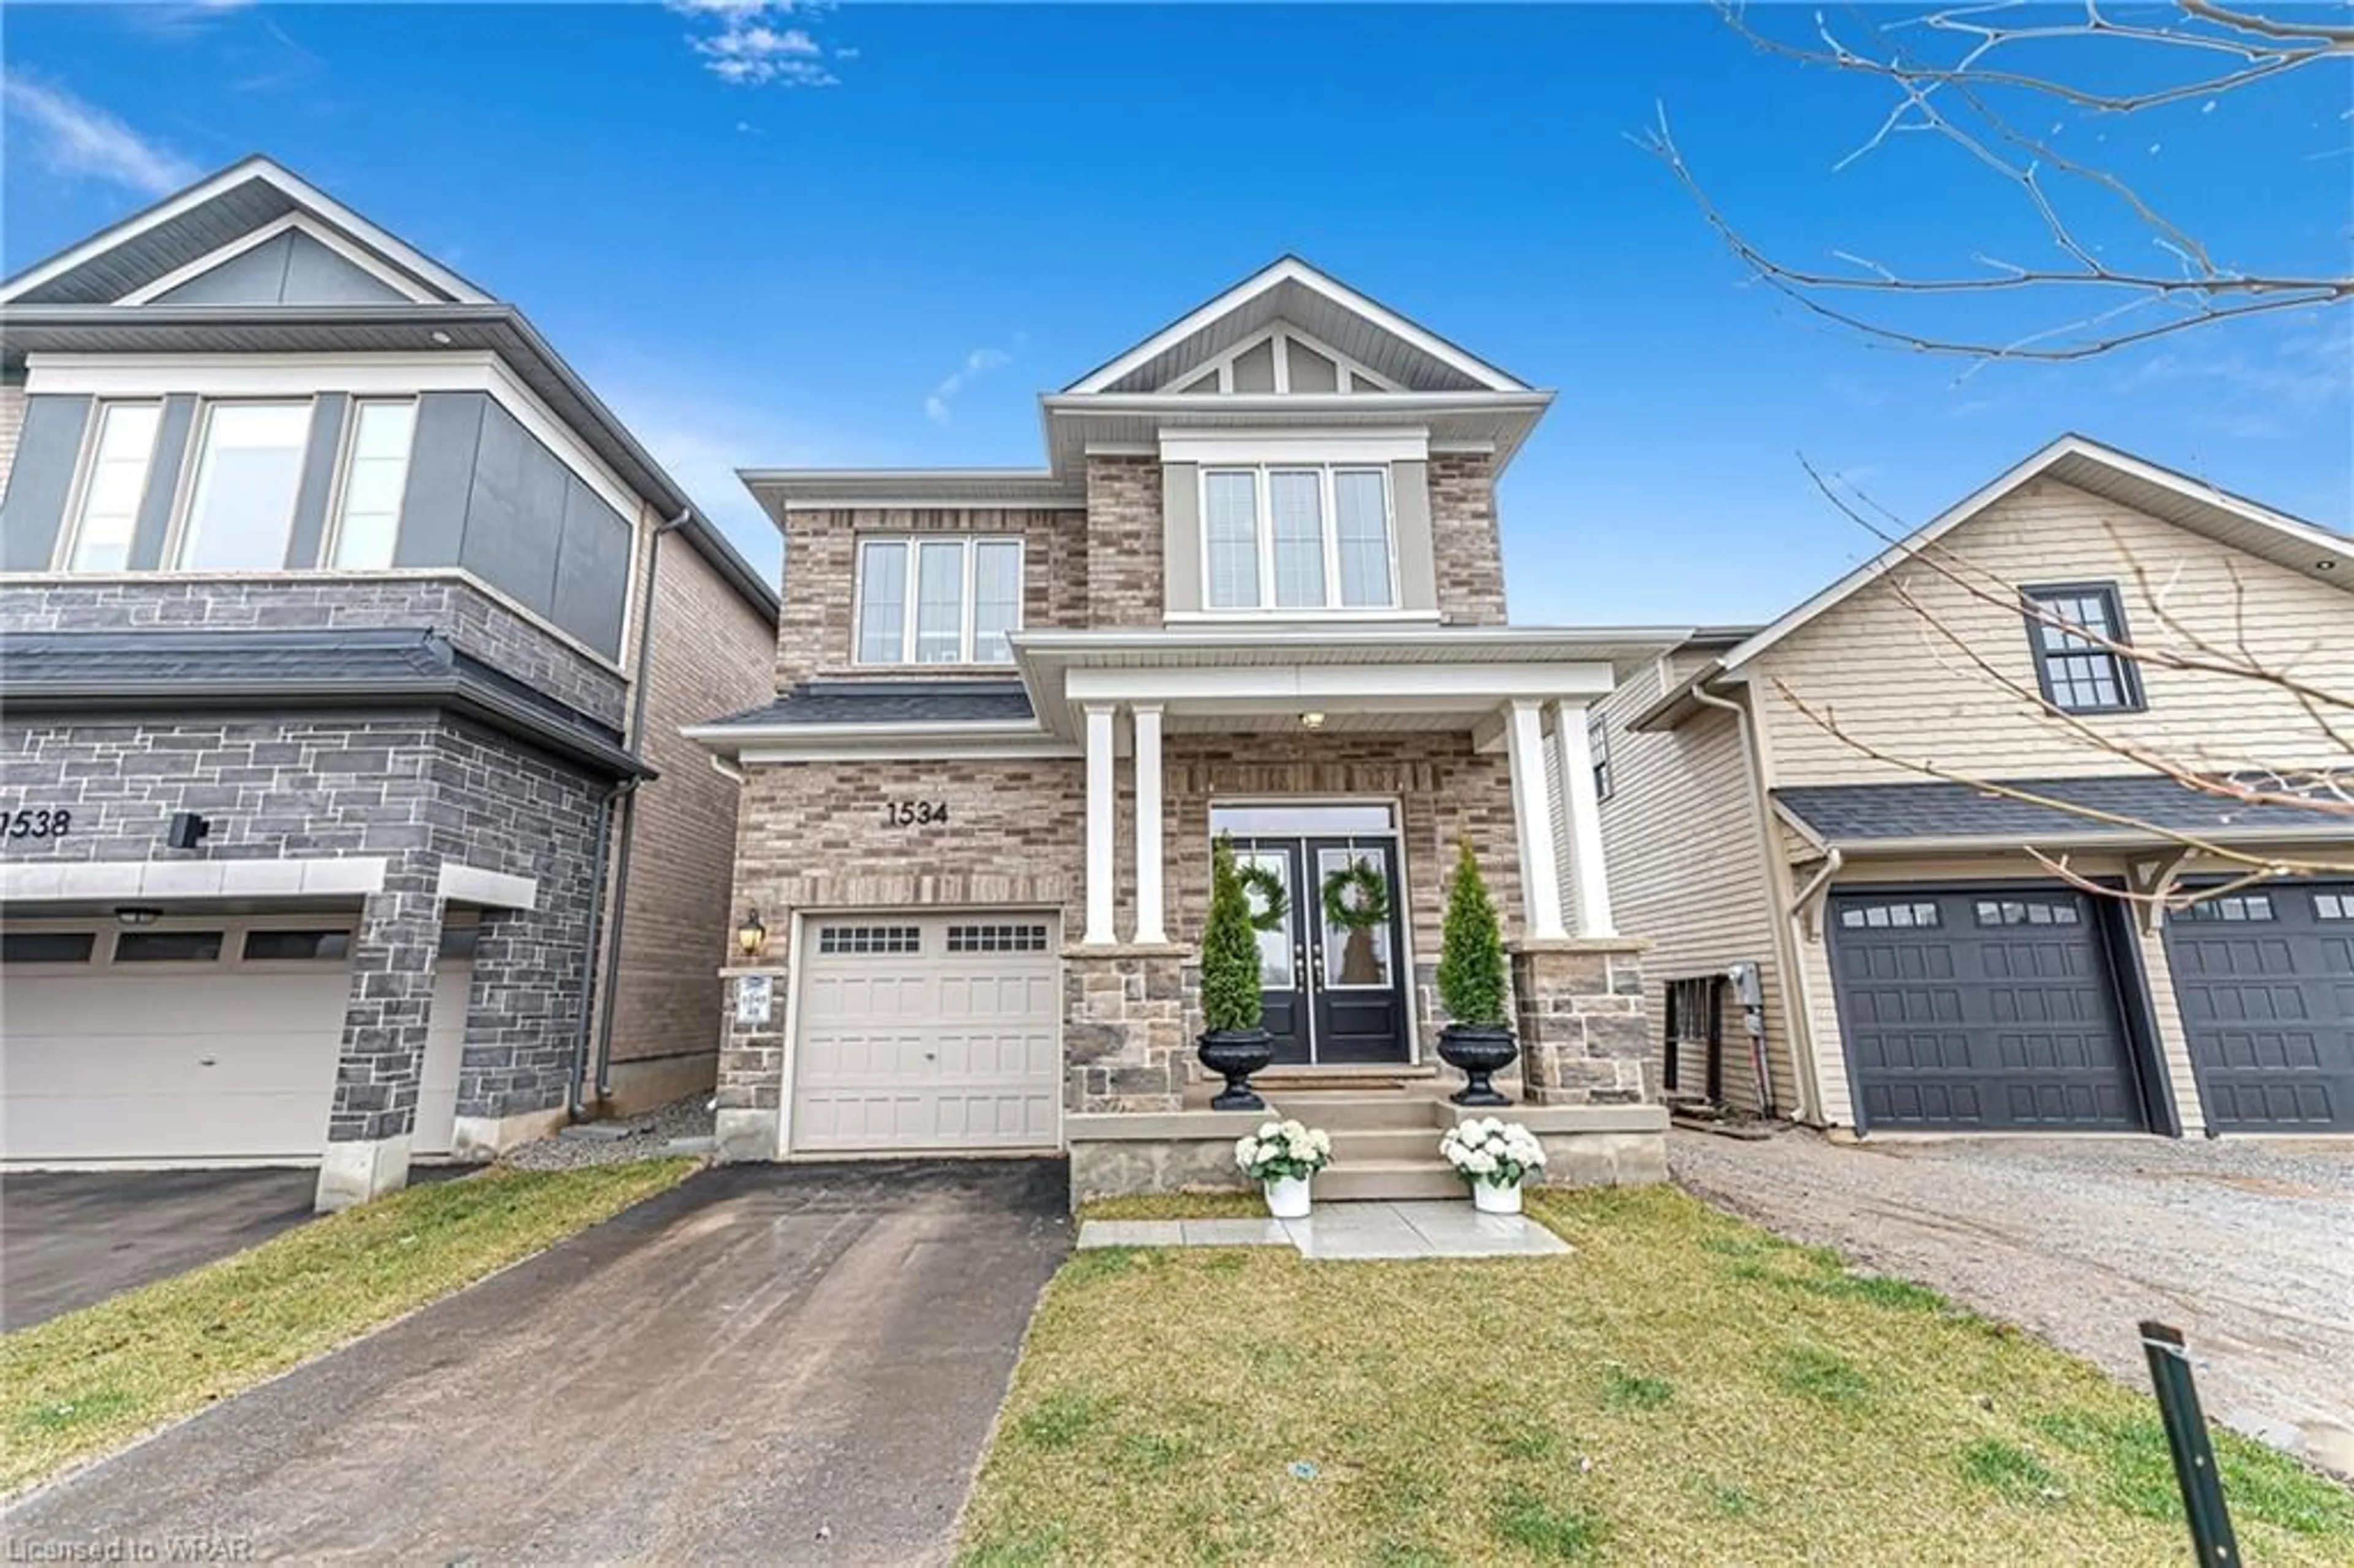 Frontside or backside of a home for 1534 Severn Dr, Milton Ontario L9E 1X9